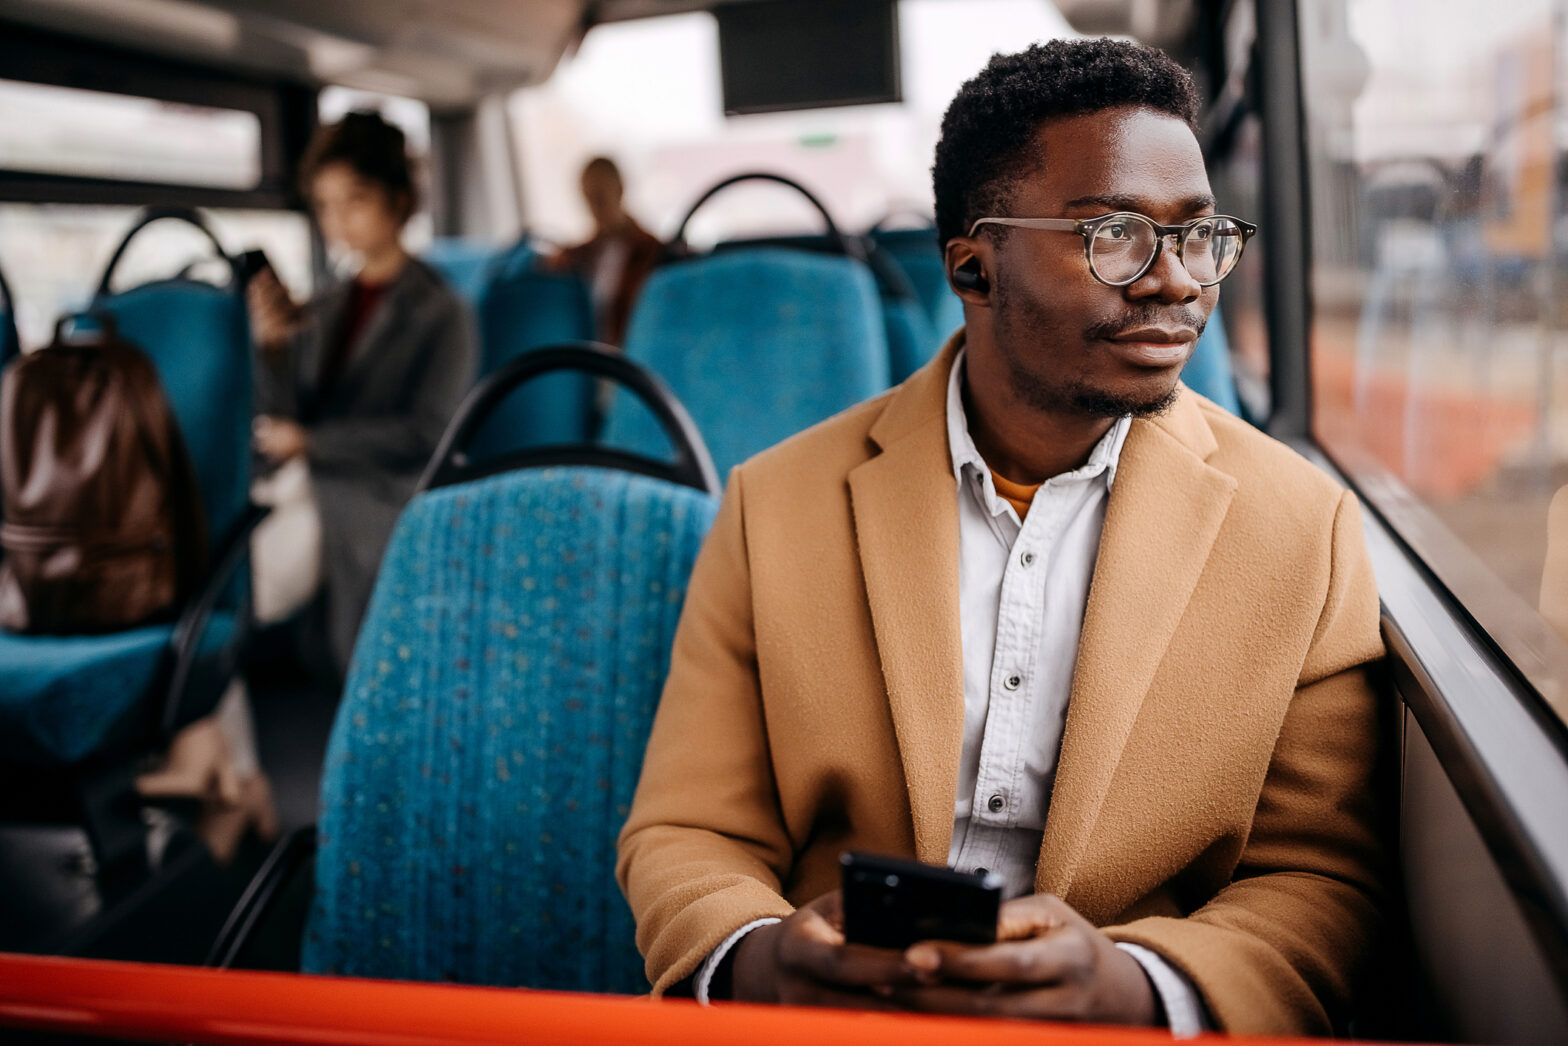 Young man on public bus using mobile phone